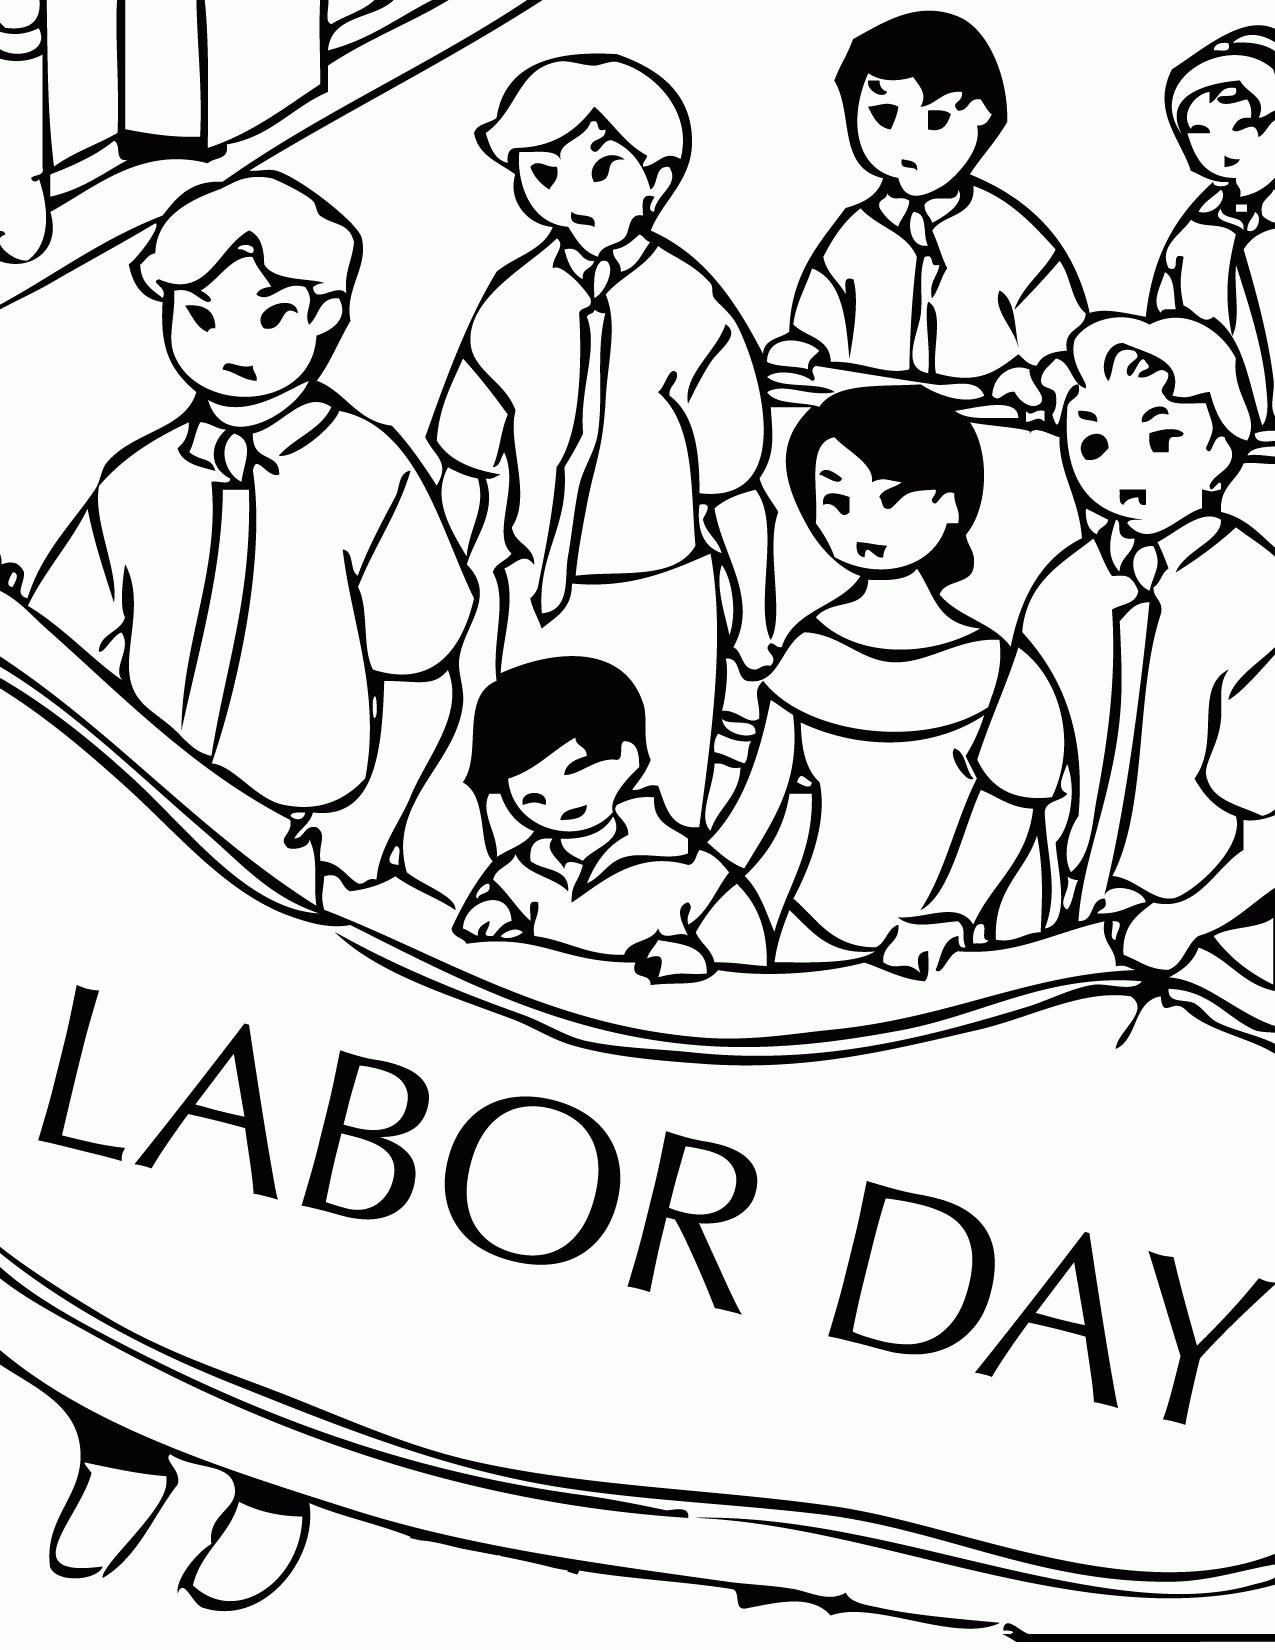 labor-day-coloring-sheets-printable-coloring-pages